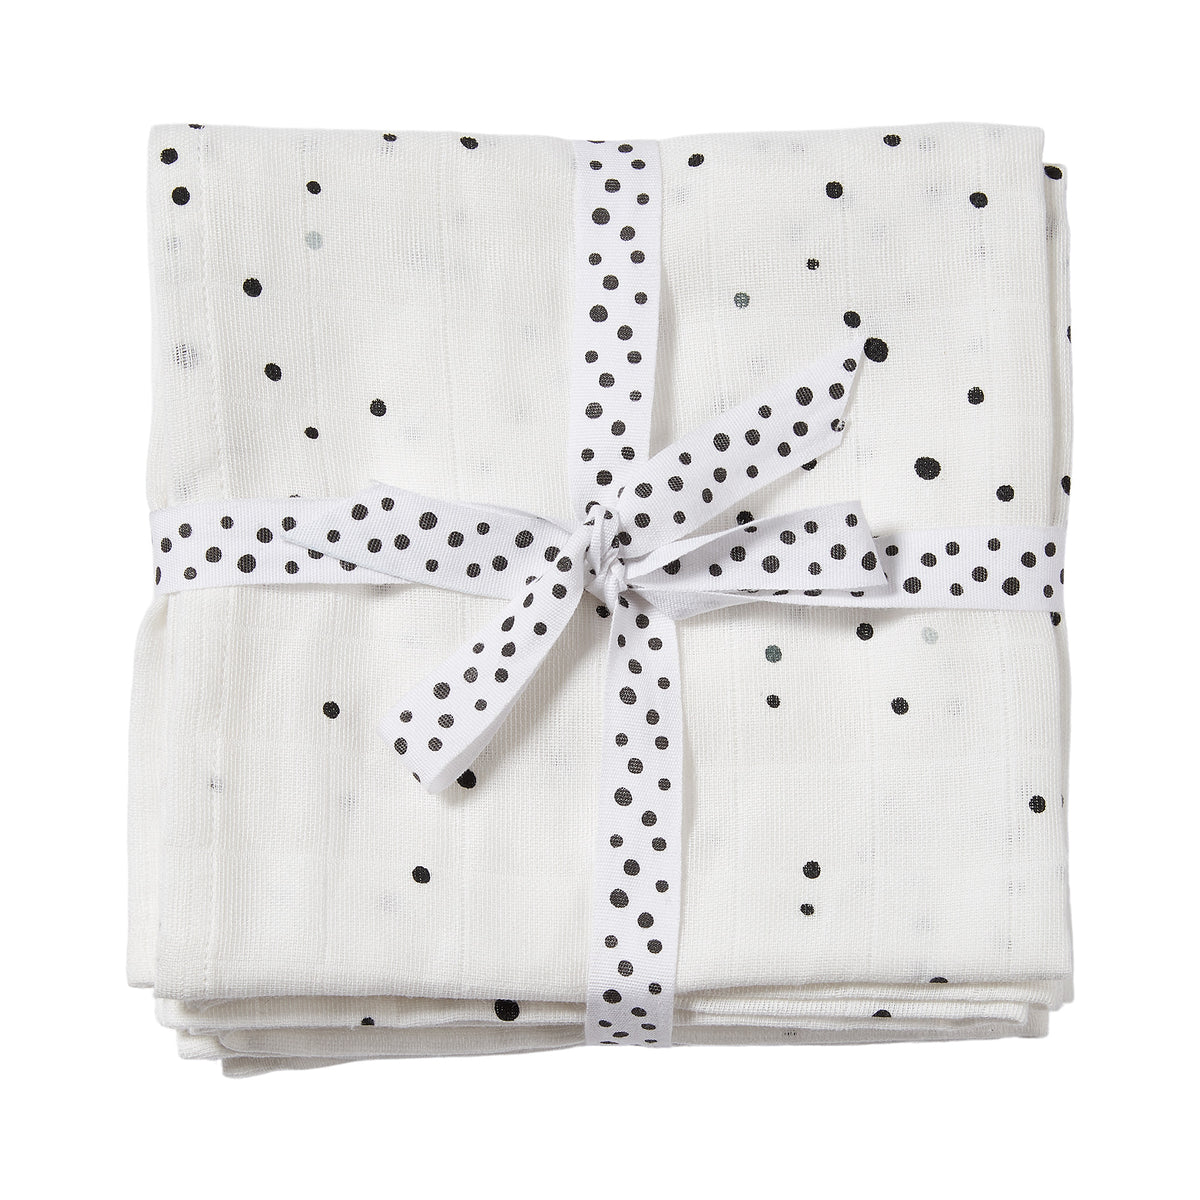 Swaddle 2-pack - Dreamy dots - Black/White - Front